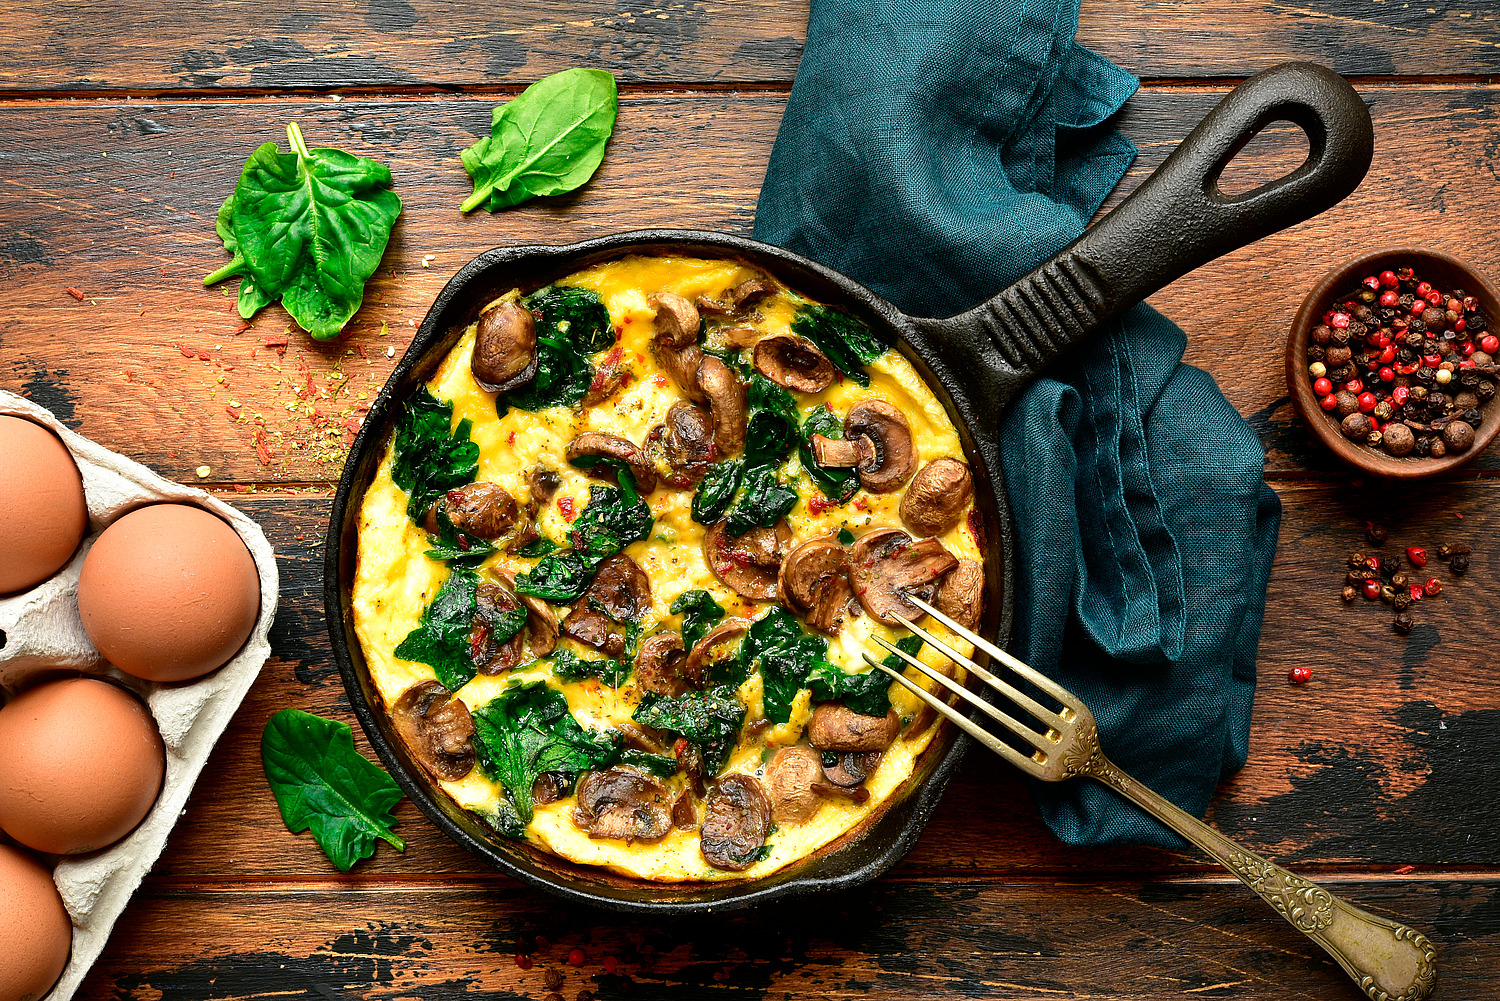 Omelette with mushrooms and spinach in a cast iron pan on a dark rustic wooden background.Top view with copy space.